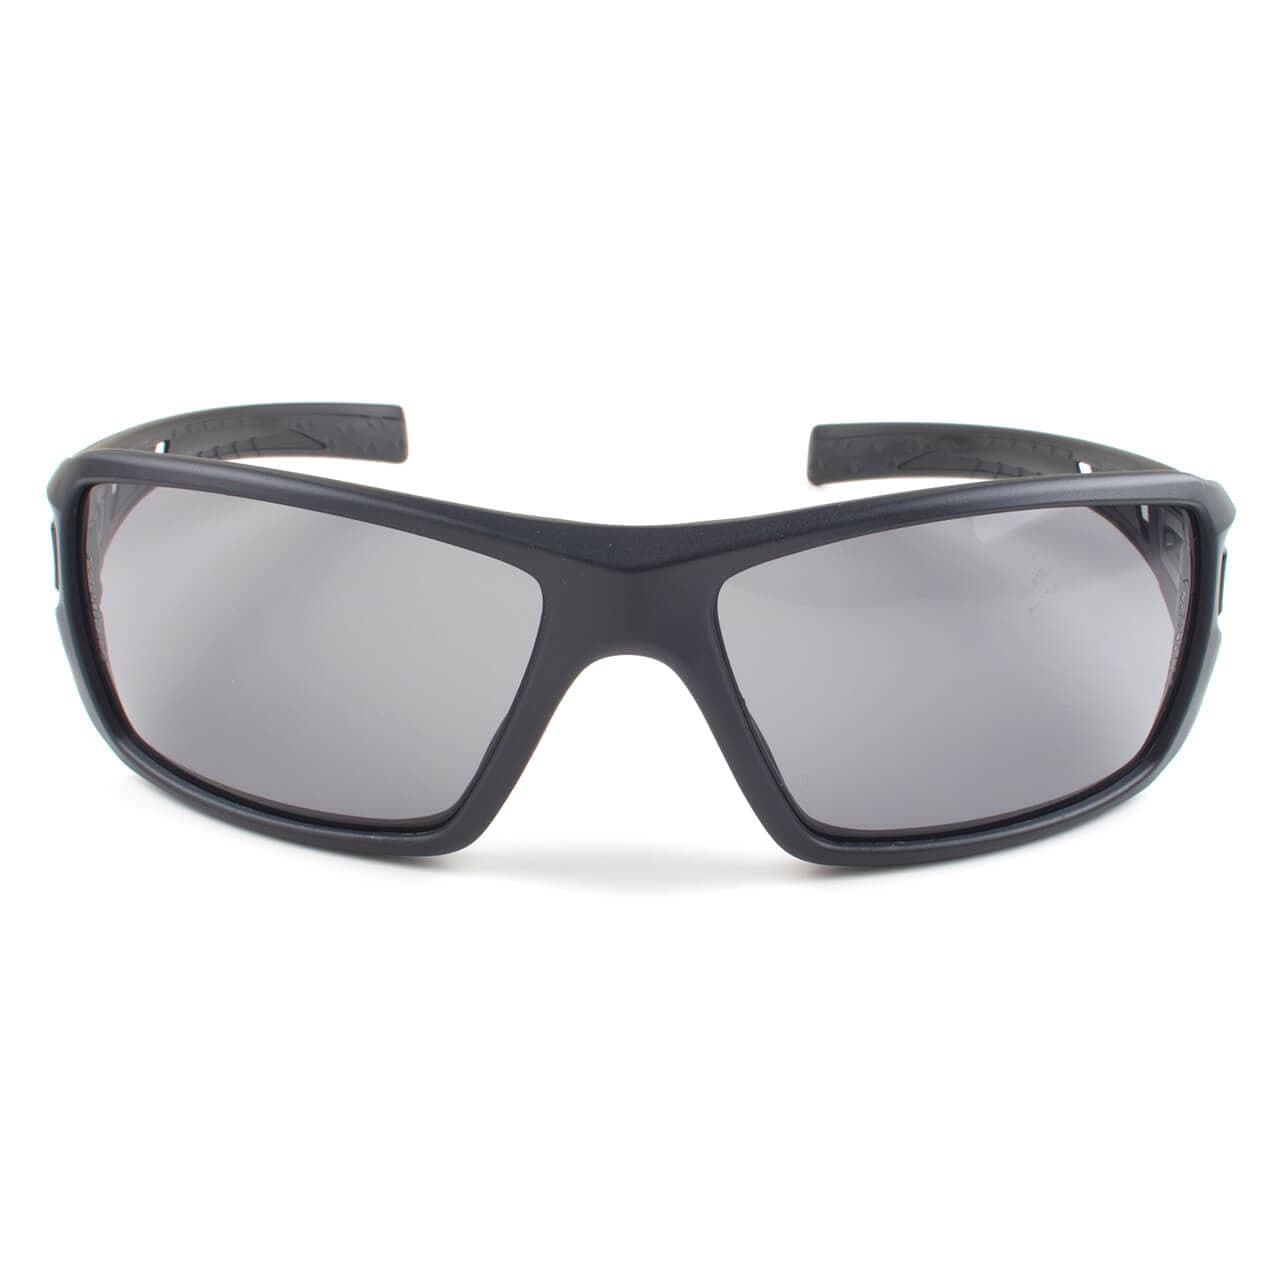 Metel M30 Safety Glasses with Black Frame and Gray Lenses Front View